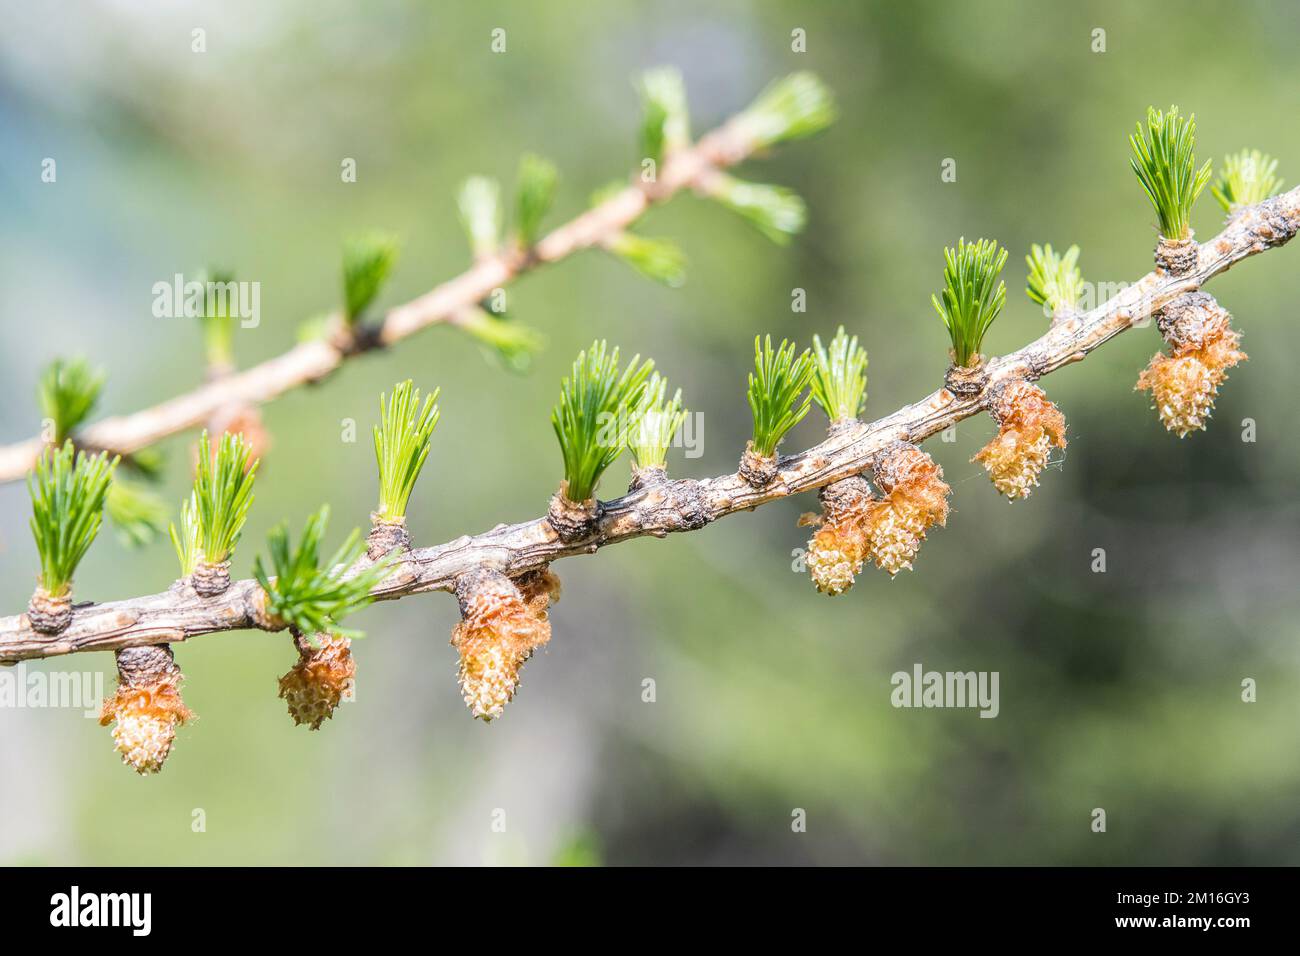 Larix decidua, the European larch, is a species of larch native to the mountains of central Europe, male flower Stock Photo